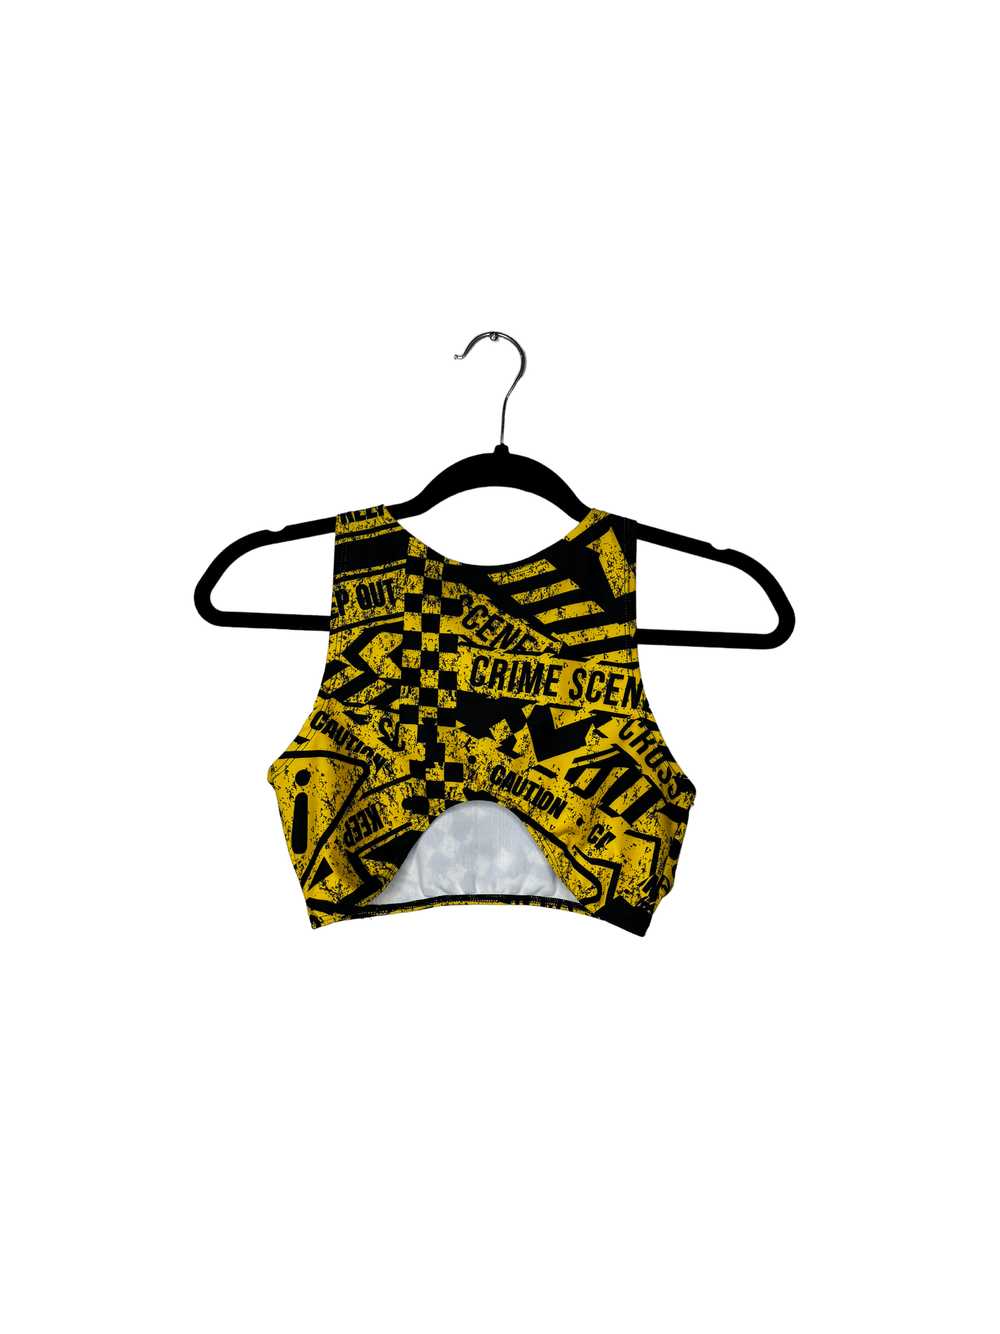 Freedom Rave Wear Caution Teaser Top - image 1